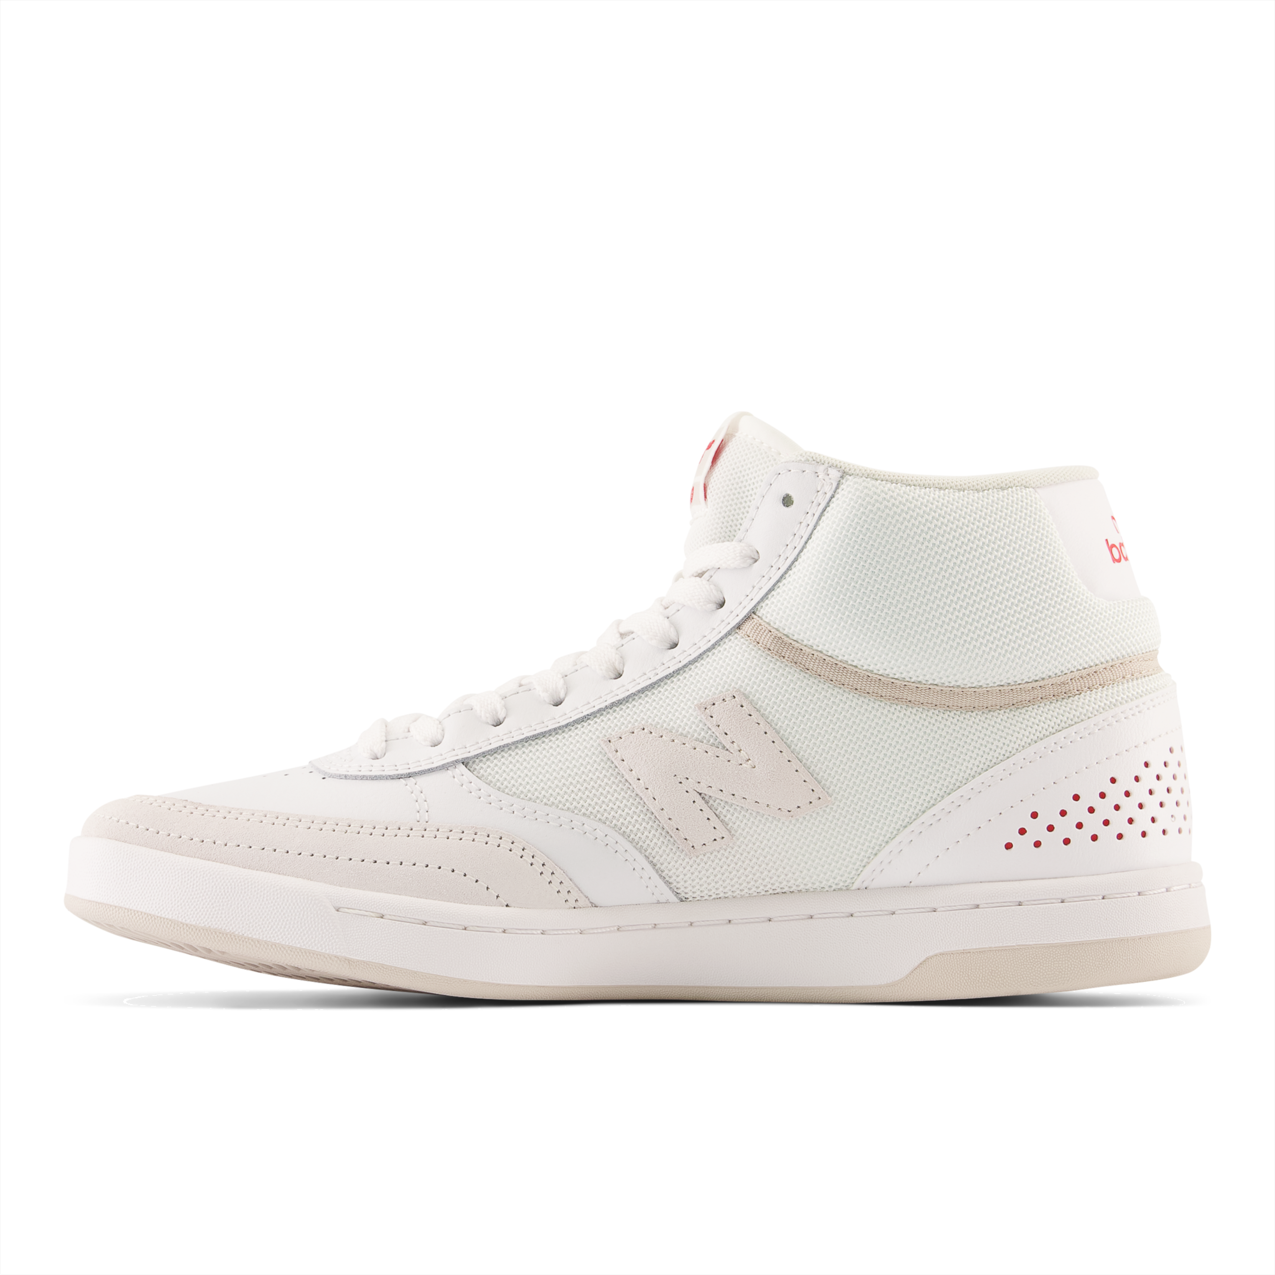 New Balance Numeric Men's 440 High White Red Shoes